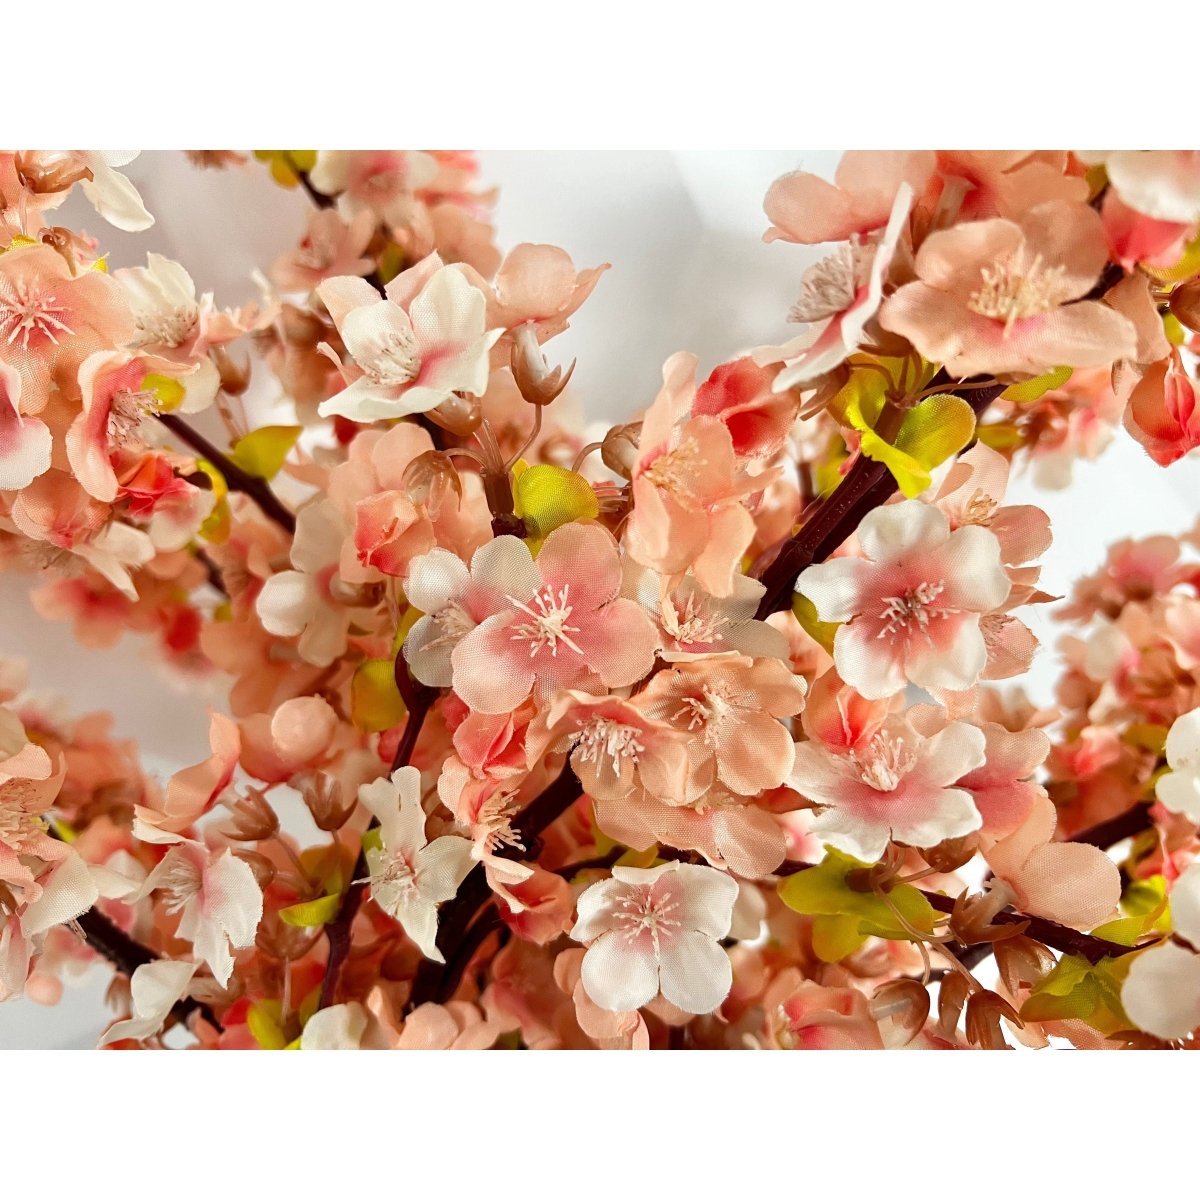 4 Branches Artificial Cherry Blossom Branches Flowers Stems Silk